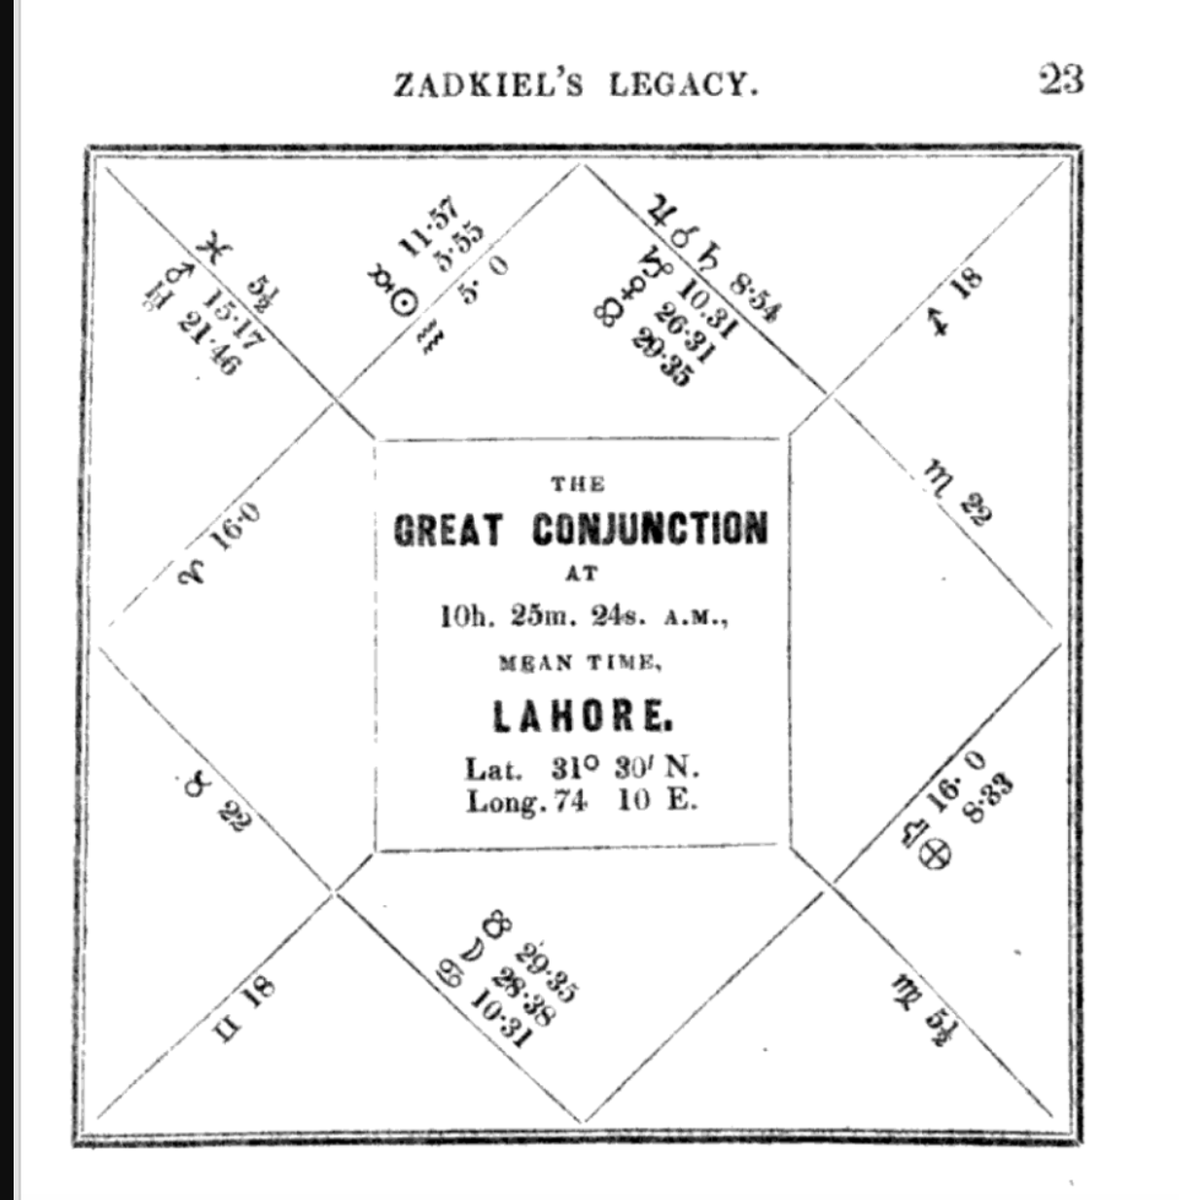 if, however, you look at the discussion on the 1842 Great Conjunction by Zadkiel, we find that he skips step [2]. After casting the chart for Lahore, he find that the conjunction is nearly on the MC, and just declares that a new religion would arise...  https://books.google.com/books?id=jh5kAAAAcAAJ&dq=great%20conjunctions&pg=PA24#v=onepage&q&f=false